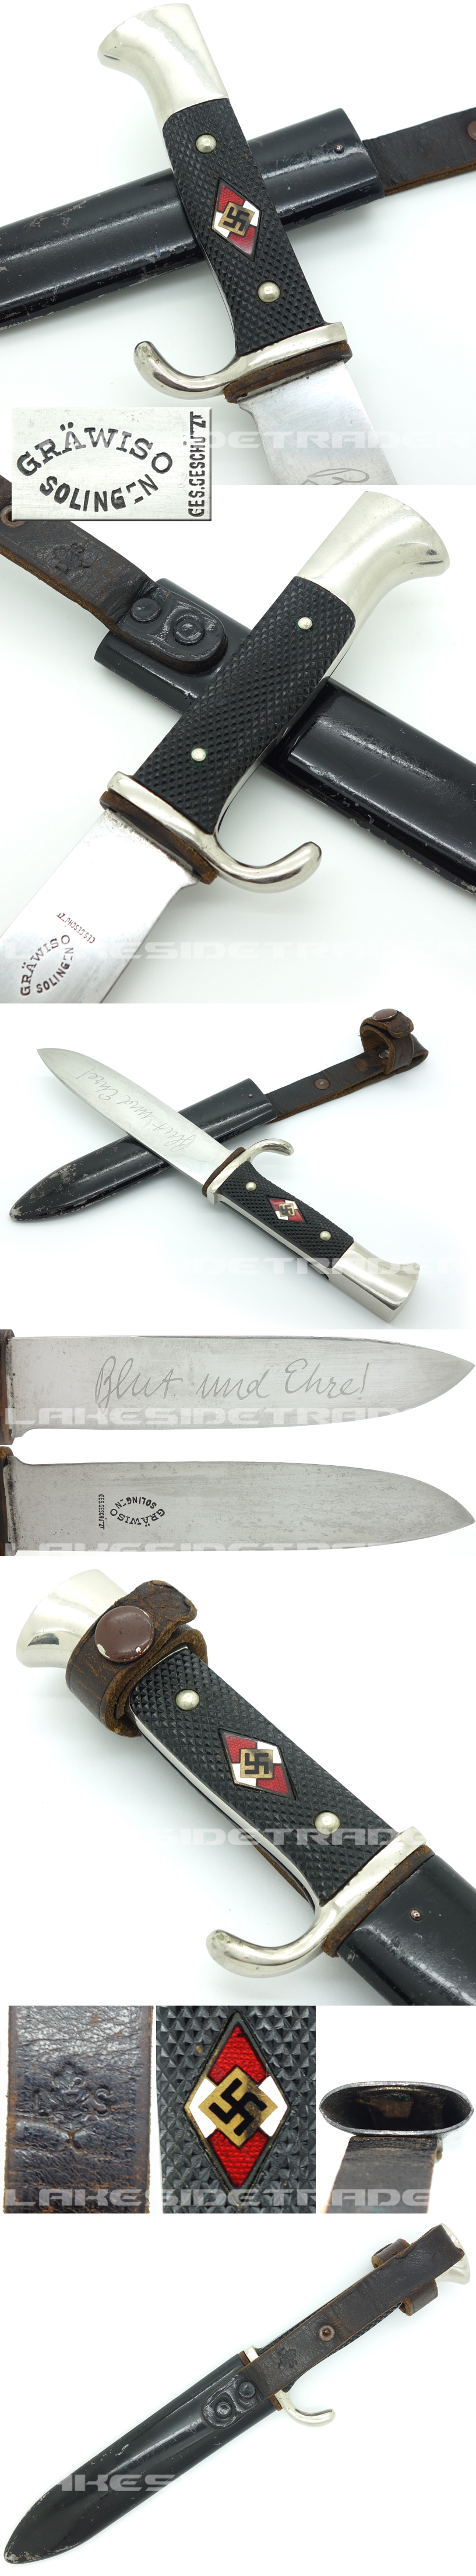 Early Hitler Youth Knife by Gräwiso